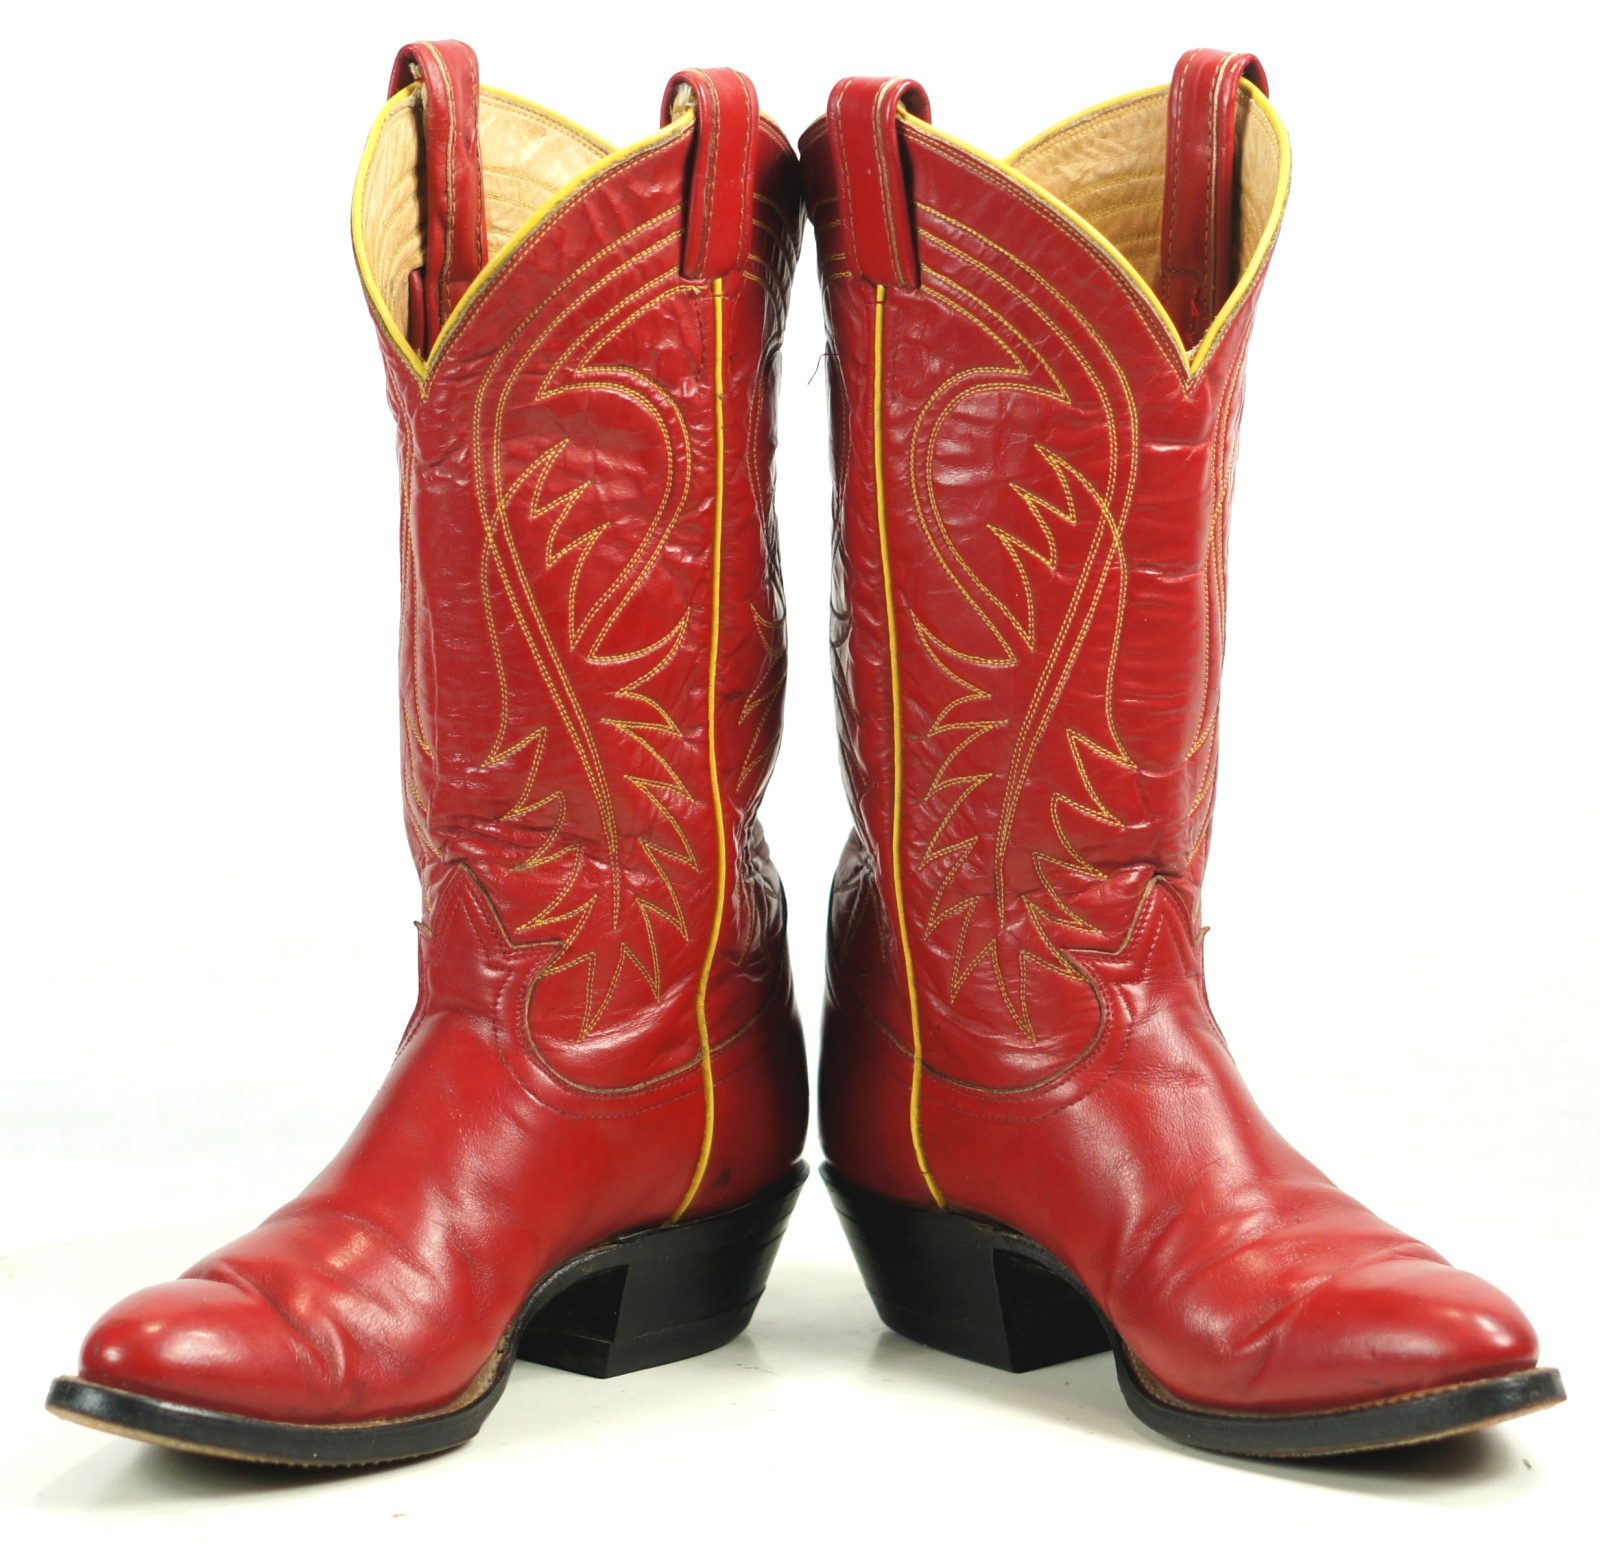 Tony Lama Red Cowboy Boots Yellow Piping Vintage Black Label US Made Women